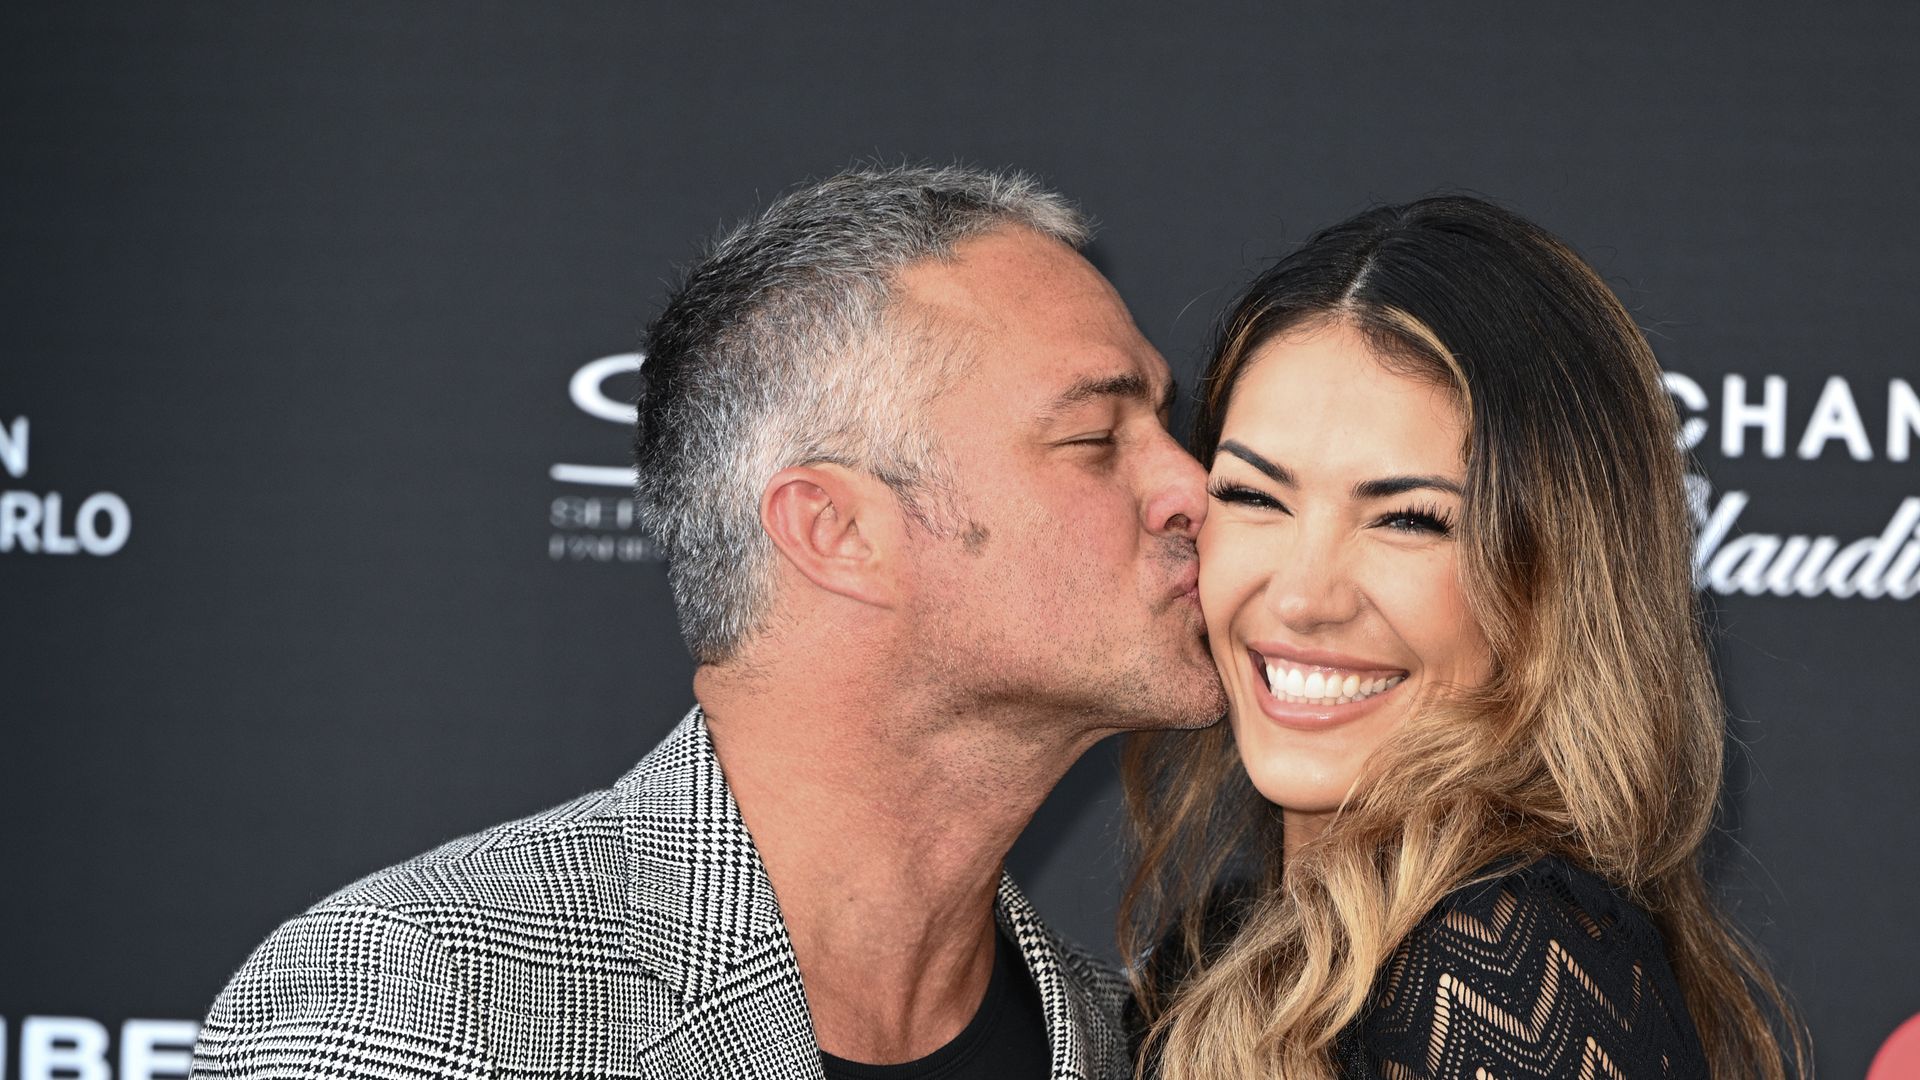 Chicago Fire star Taylor Kinney's girlfriend Ashley Cruger hits back at criticism over relationship